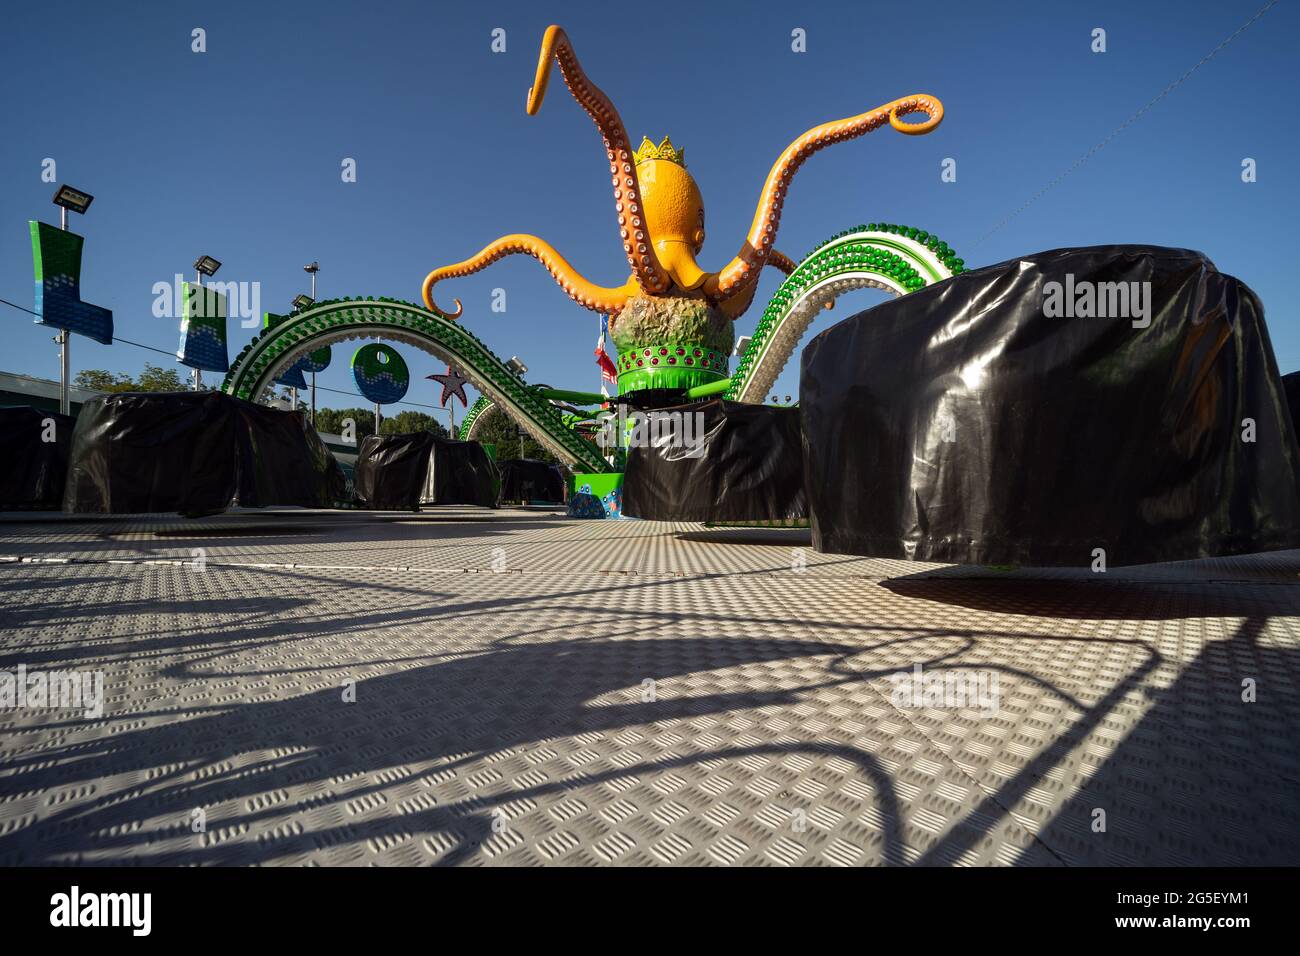 Idle octopus amusement ride attraction in an amusement park in northern Italy Stock Photo